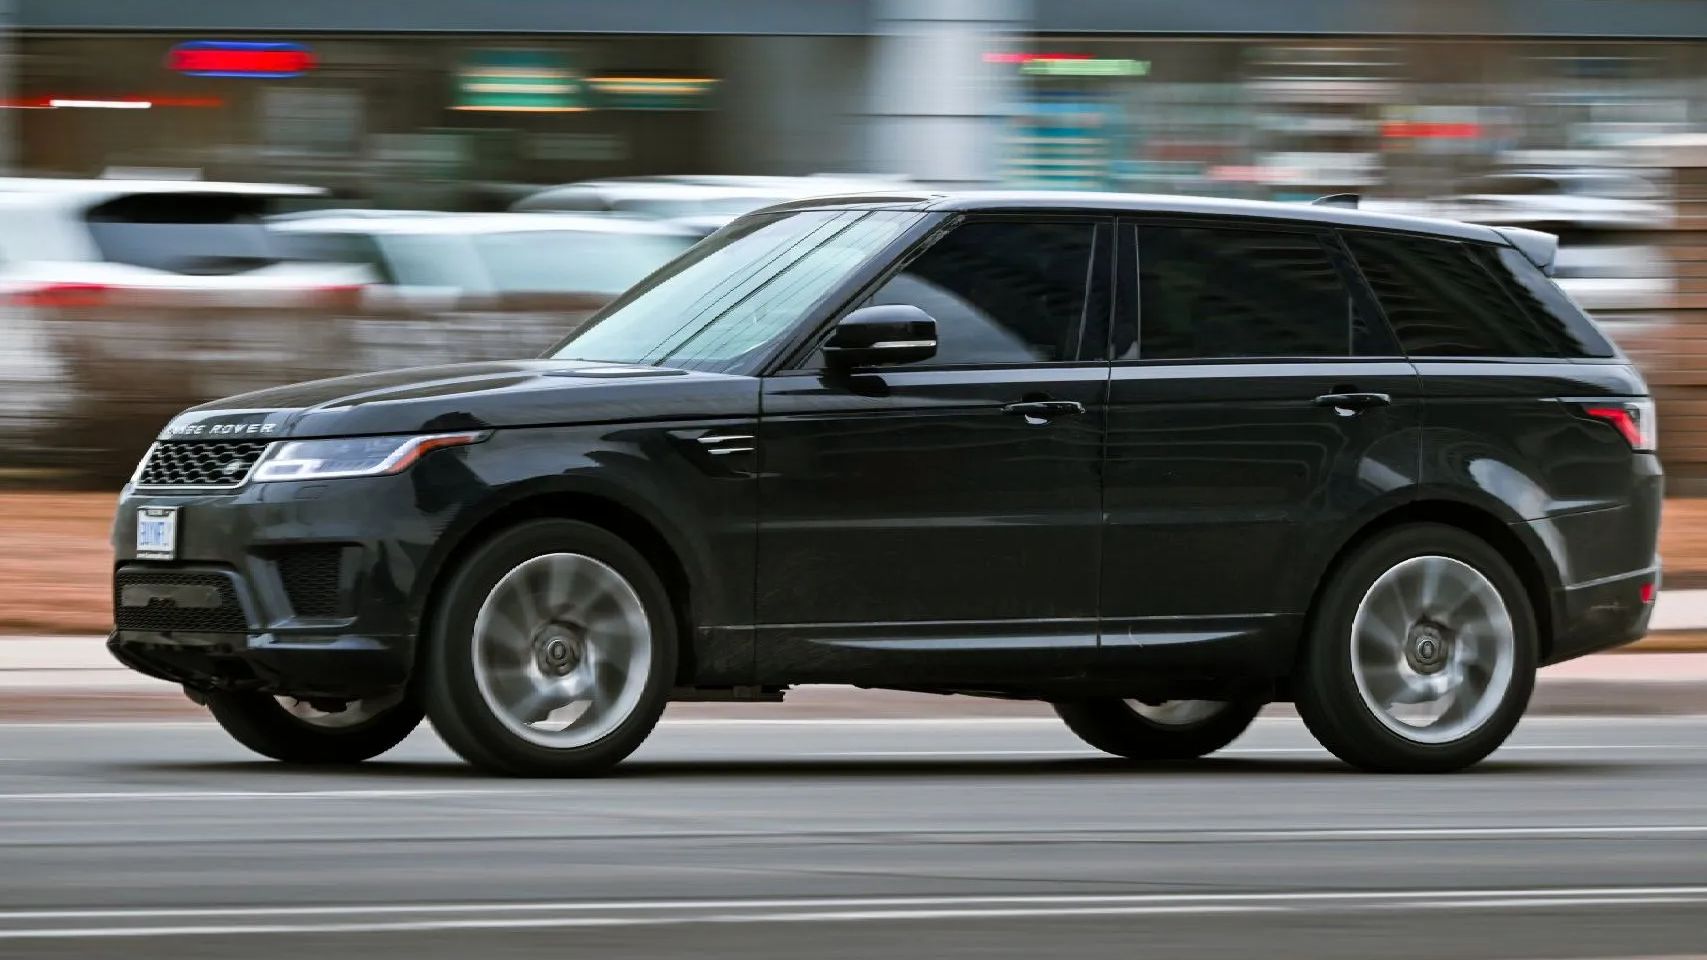 Land rover Service and Repairs at ﻿Guy's Automotive﻿ in ﻿North Tampa and Tampa, FL﻿